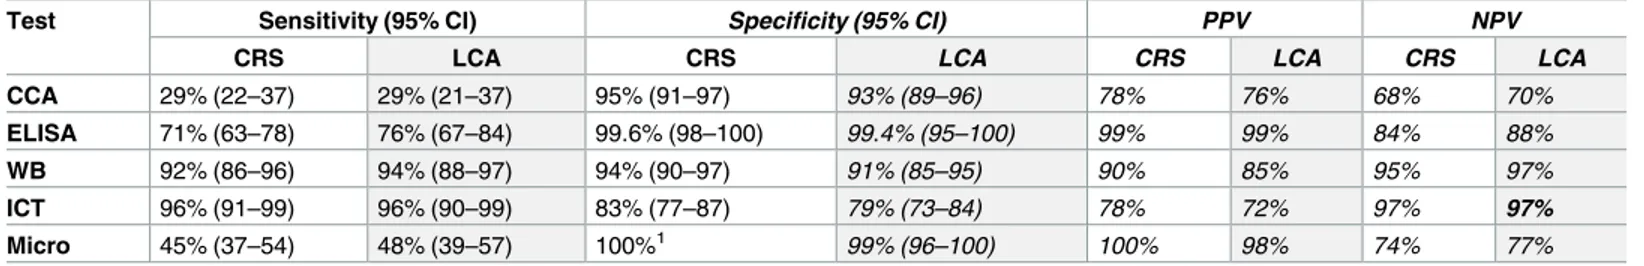 Table 2. Accuracy and predictive values according to CRS and to LCA.